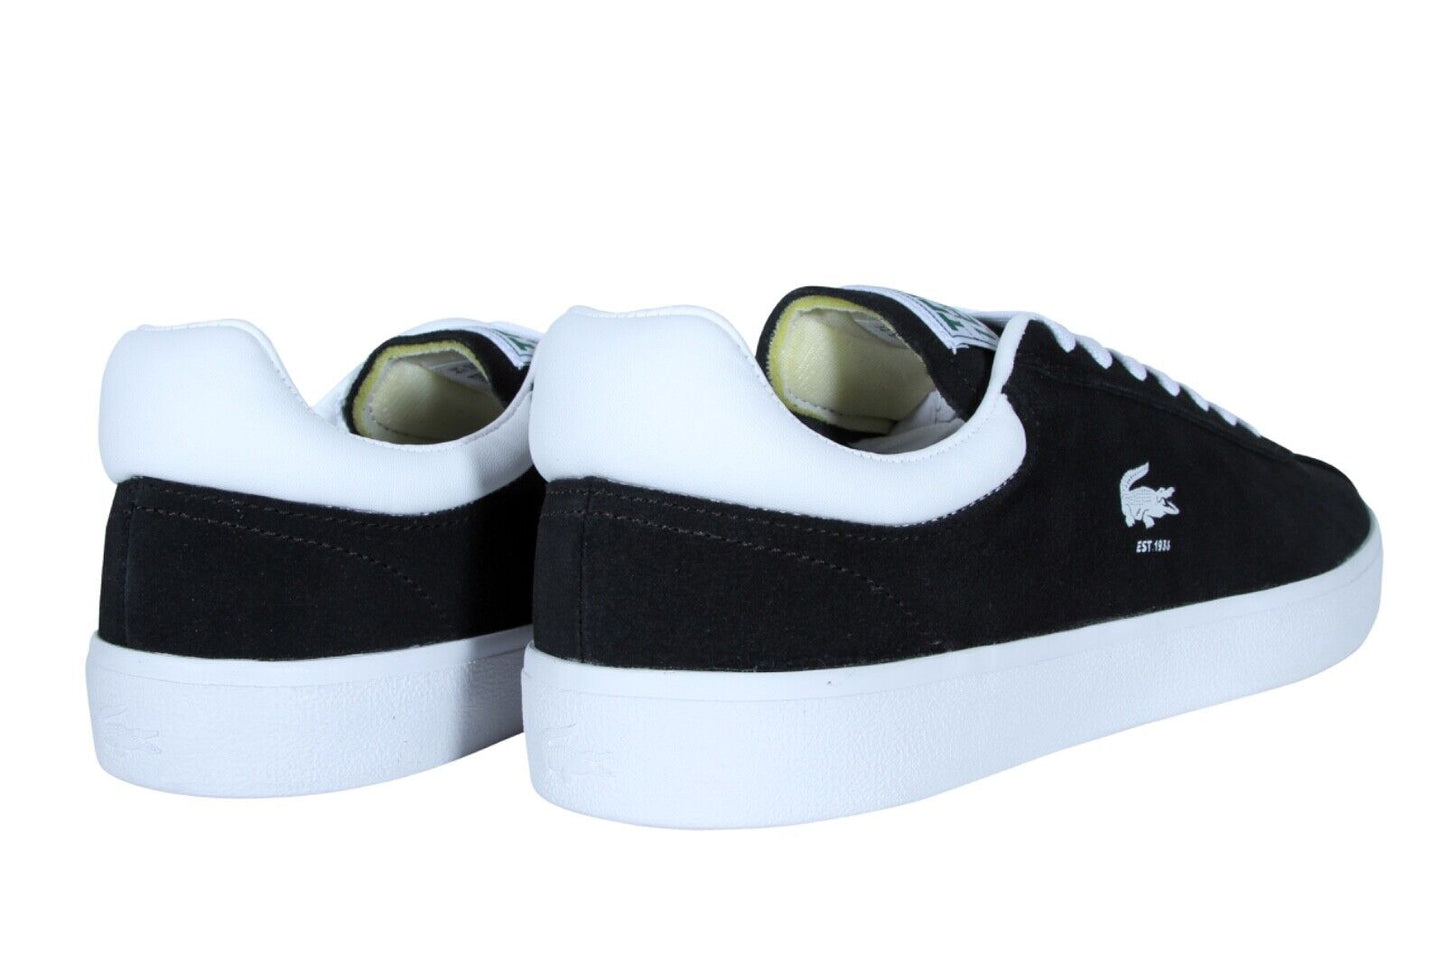 Lacoste Baseshot 223 1 SMA Men’s Suede Sneakers in Black and White 746SMA0065312